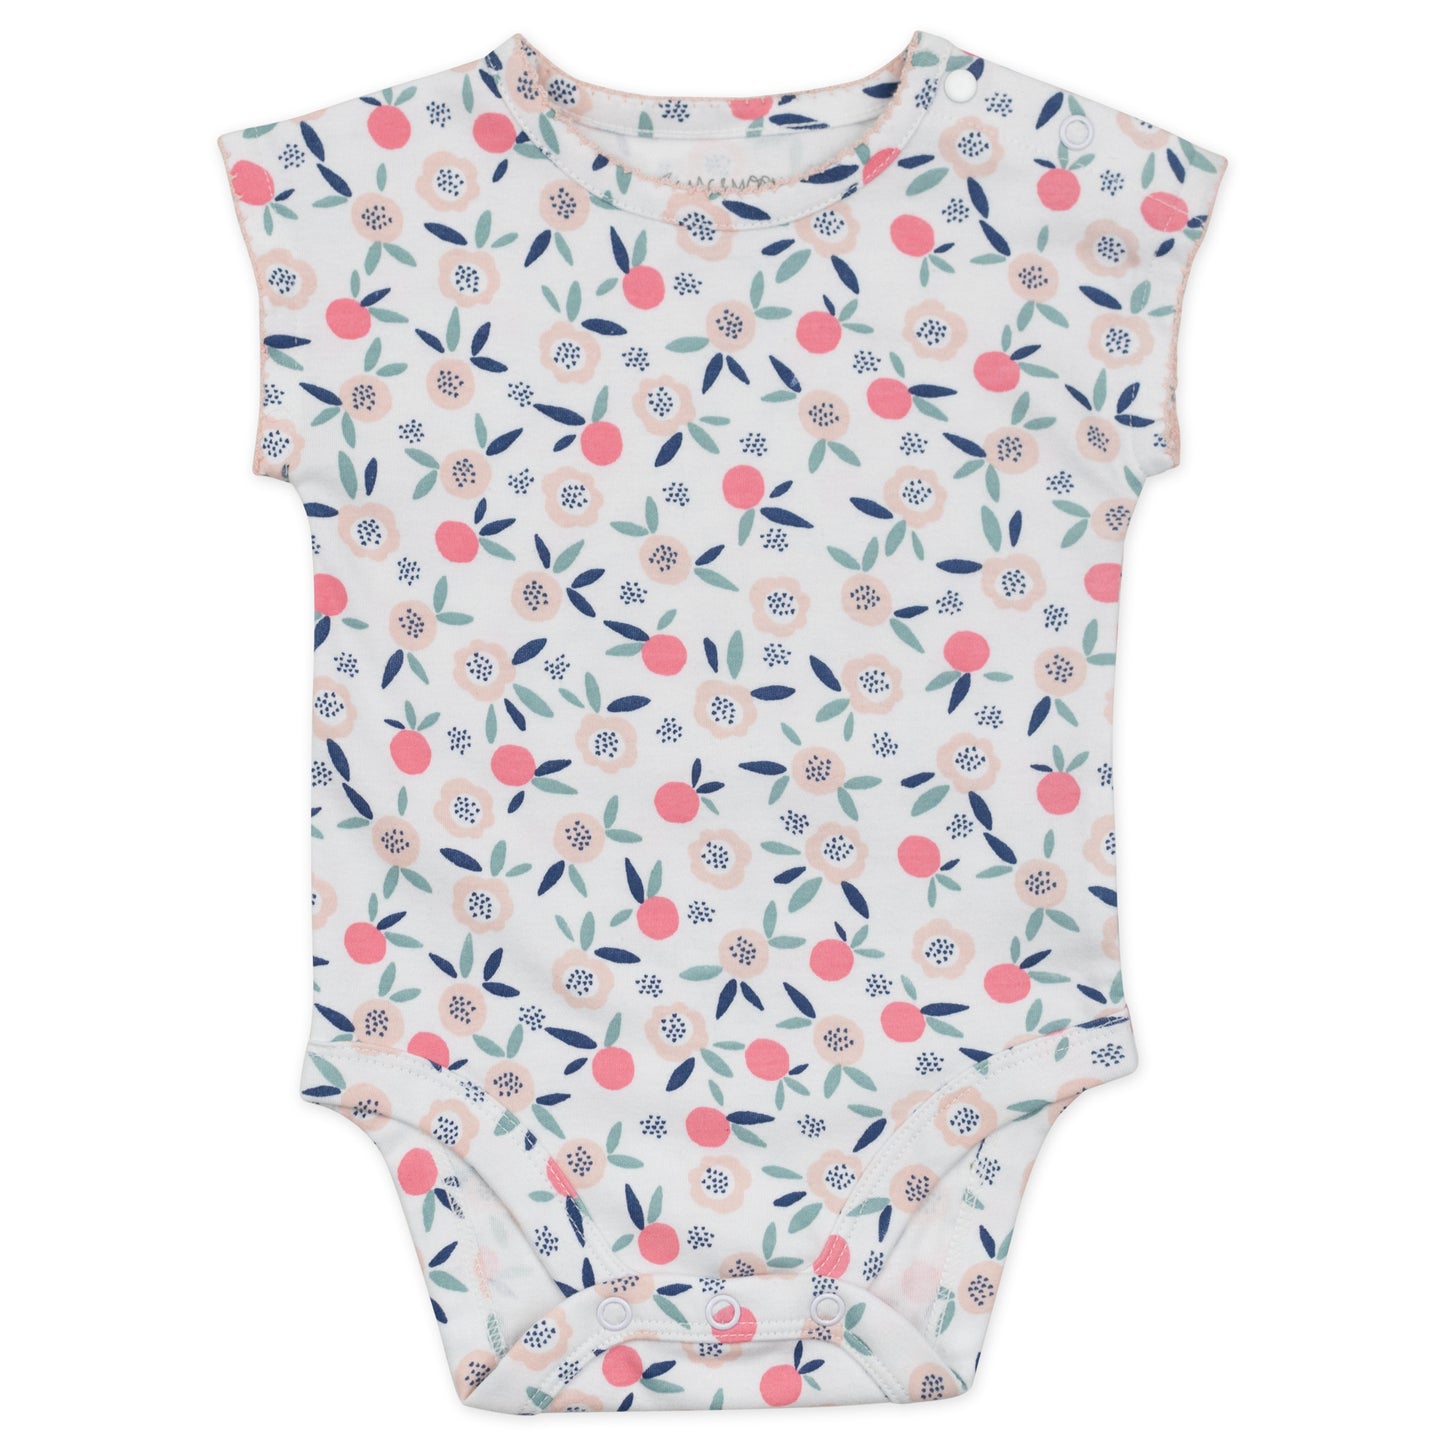 2-Piece Organic Cotton Overall Set in Bunny Floral Print